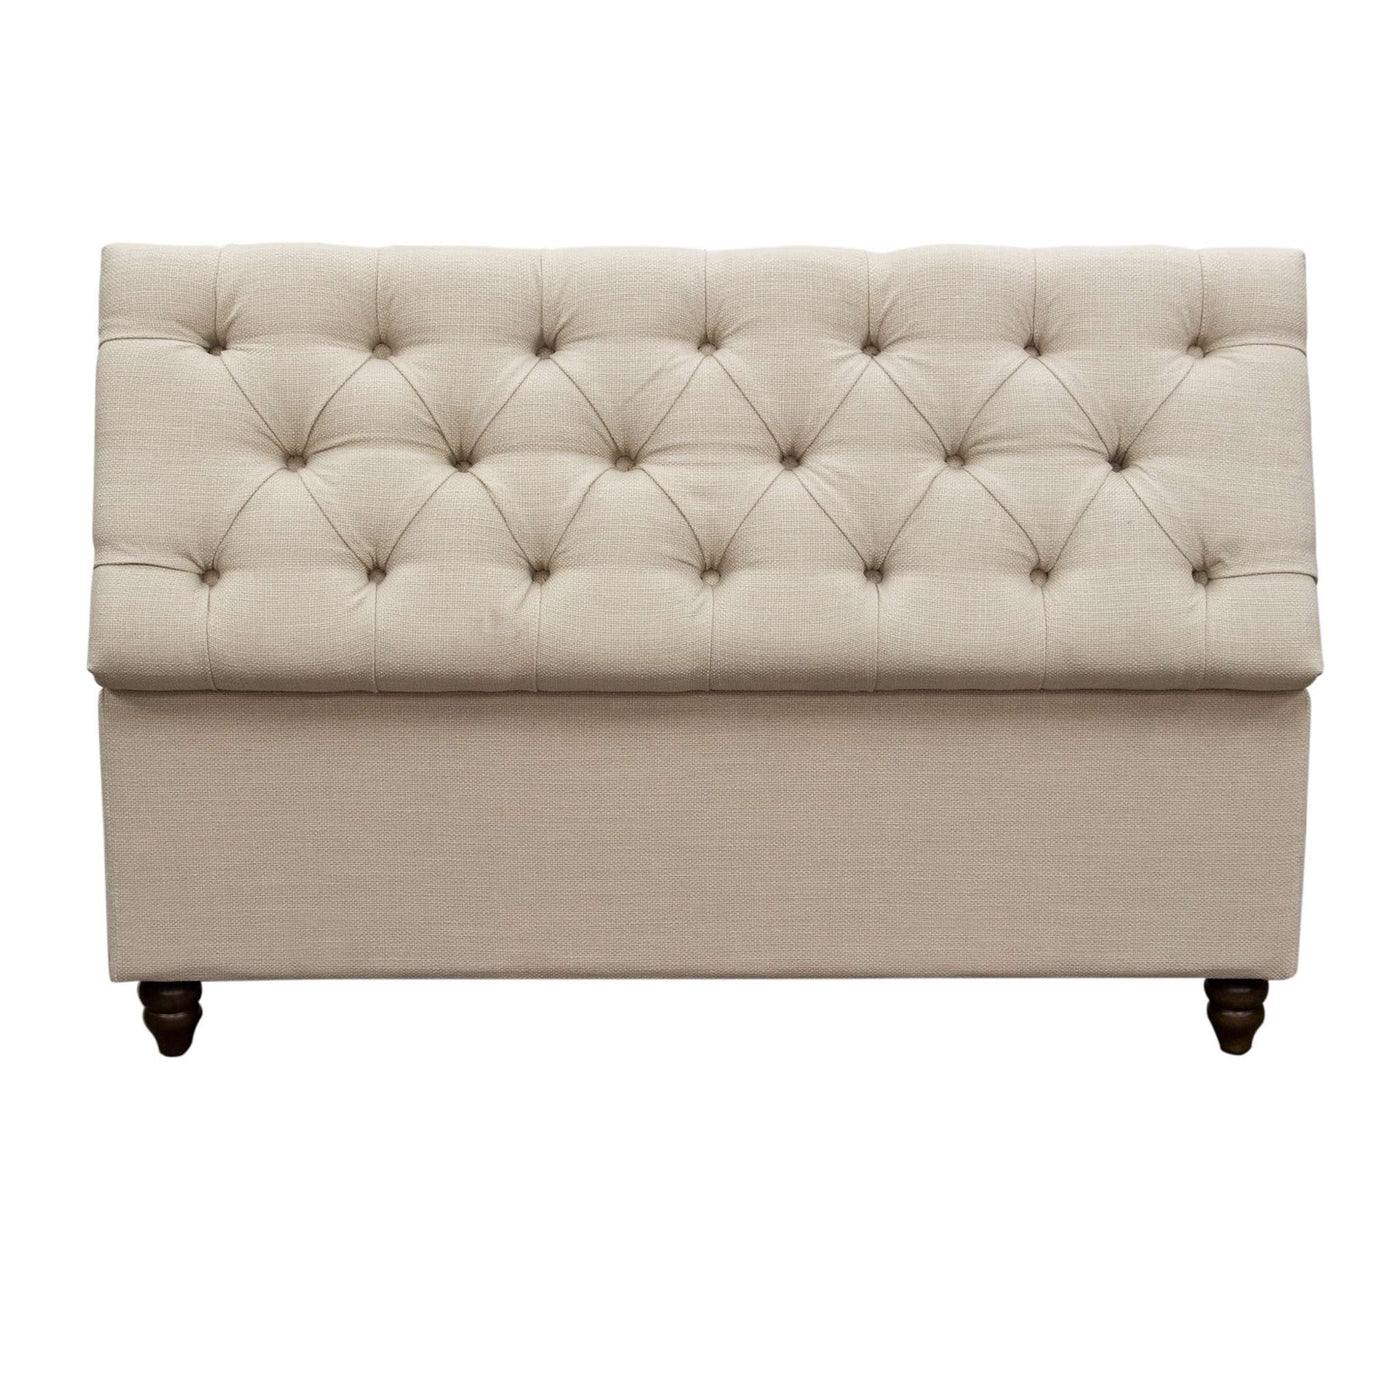 The Park Ave Bed by Diamond Sofa